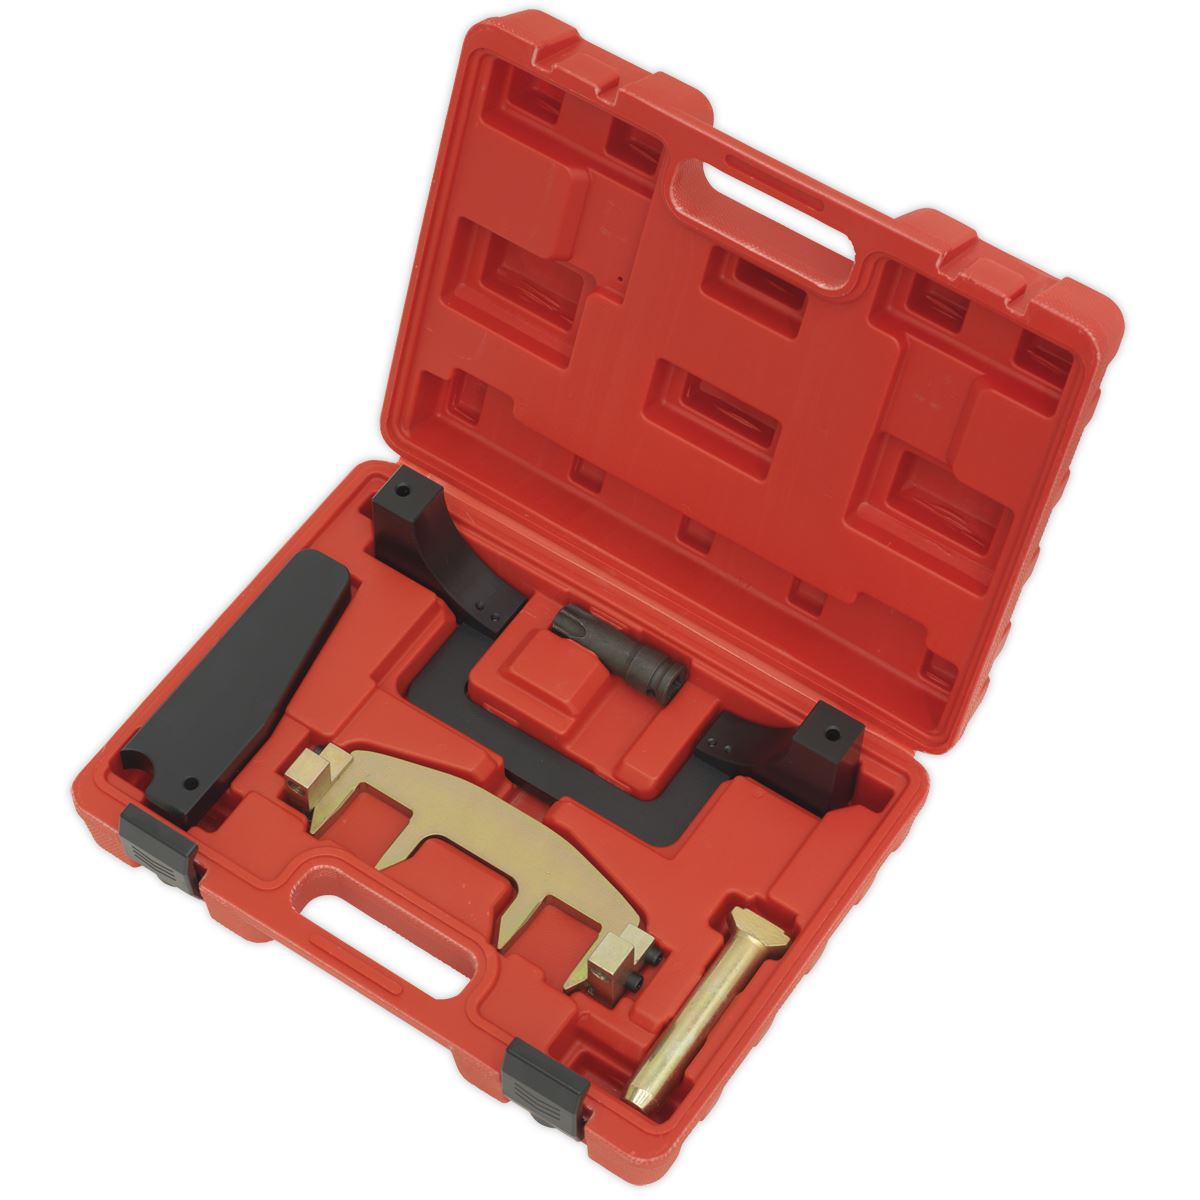 Sealey Petrol Engine Timing Tool Kit - for Mercedes 1.6/1.8 M271 - Chain Drive